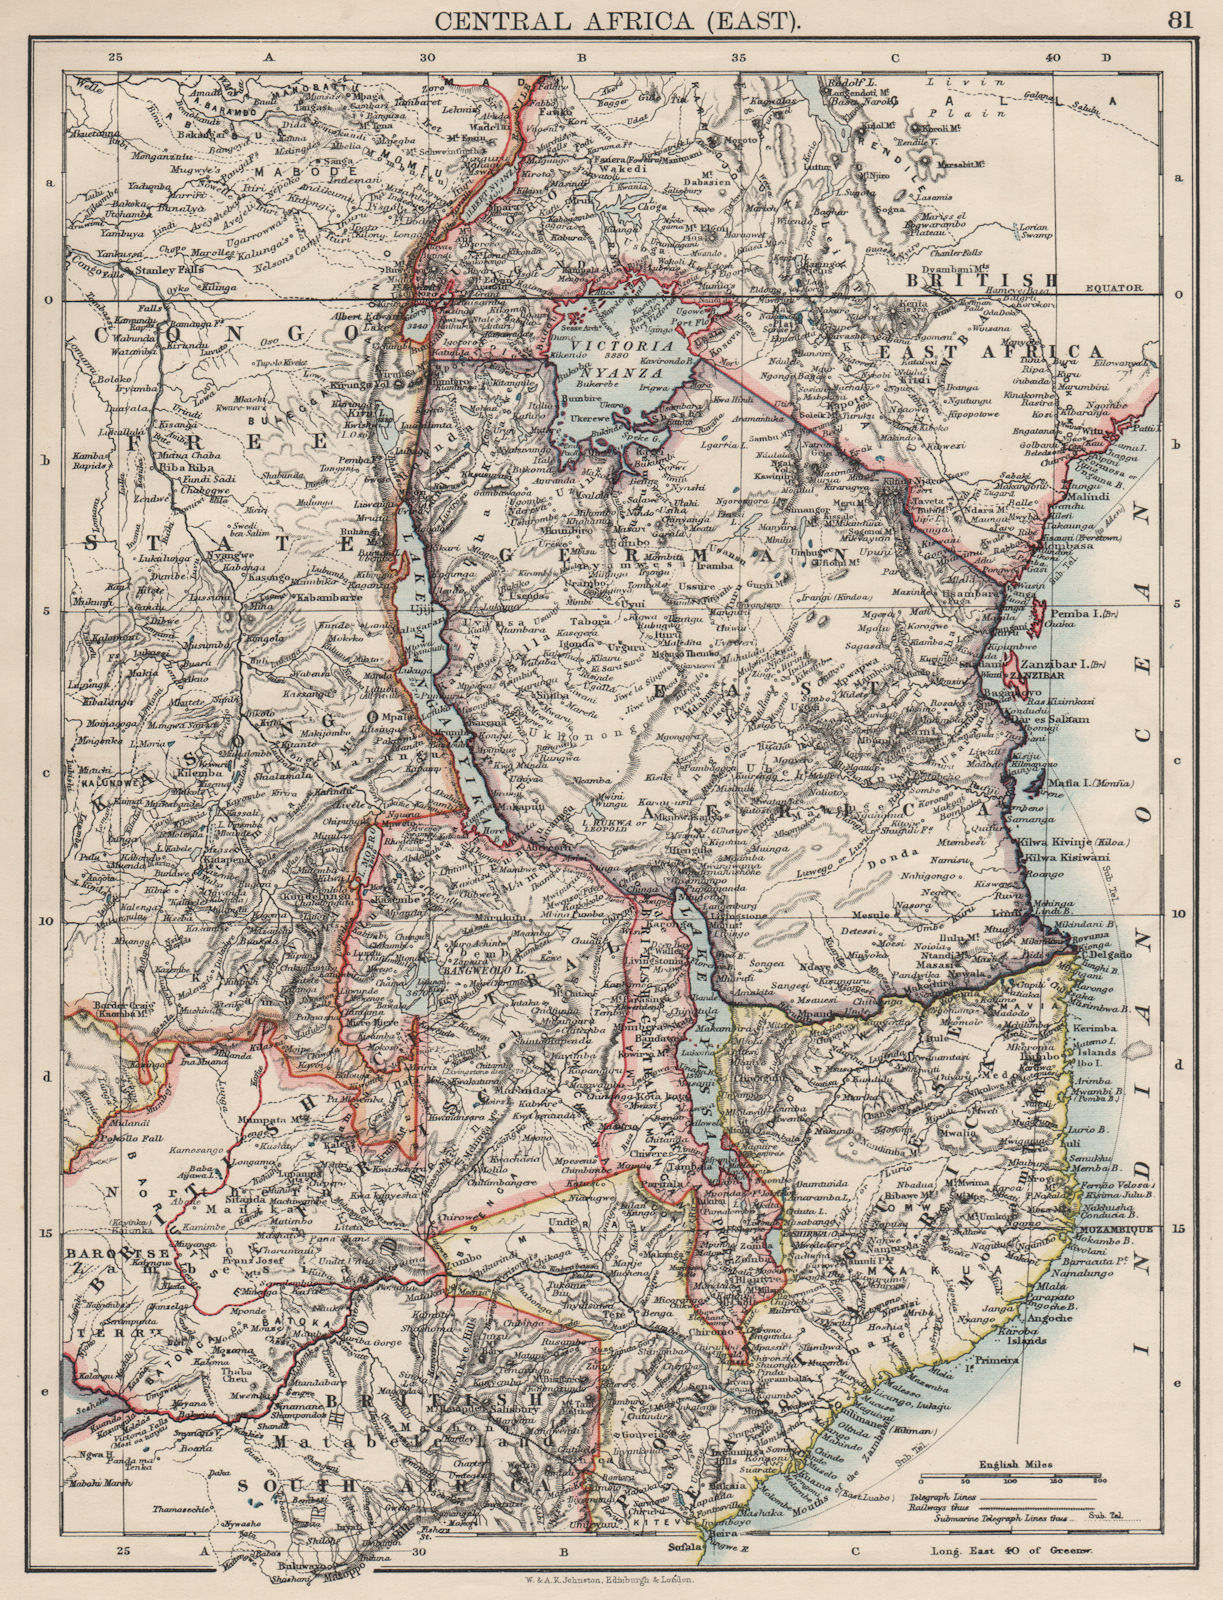 COLONIAL EAST AFRICA. German/British/Portuguese East Africa. Tanzania 1900 map